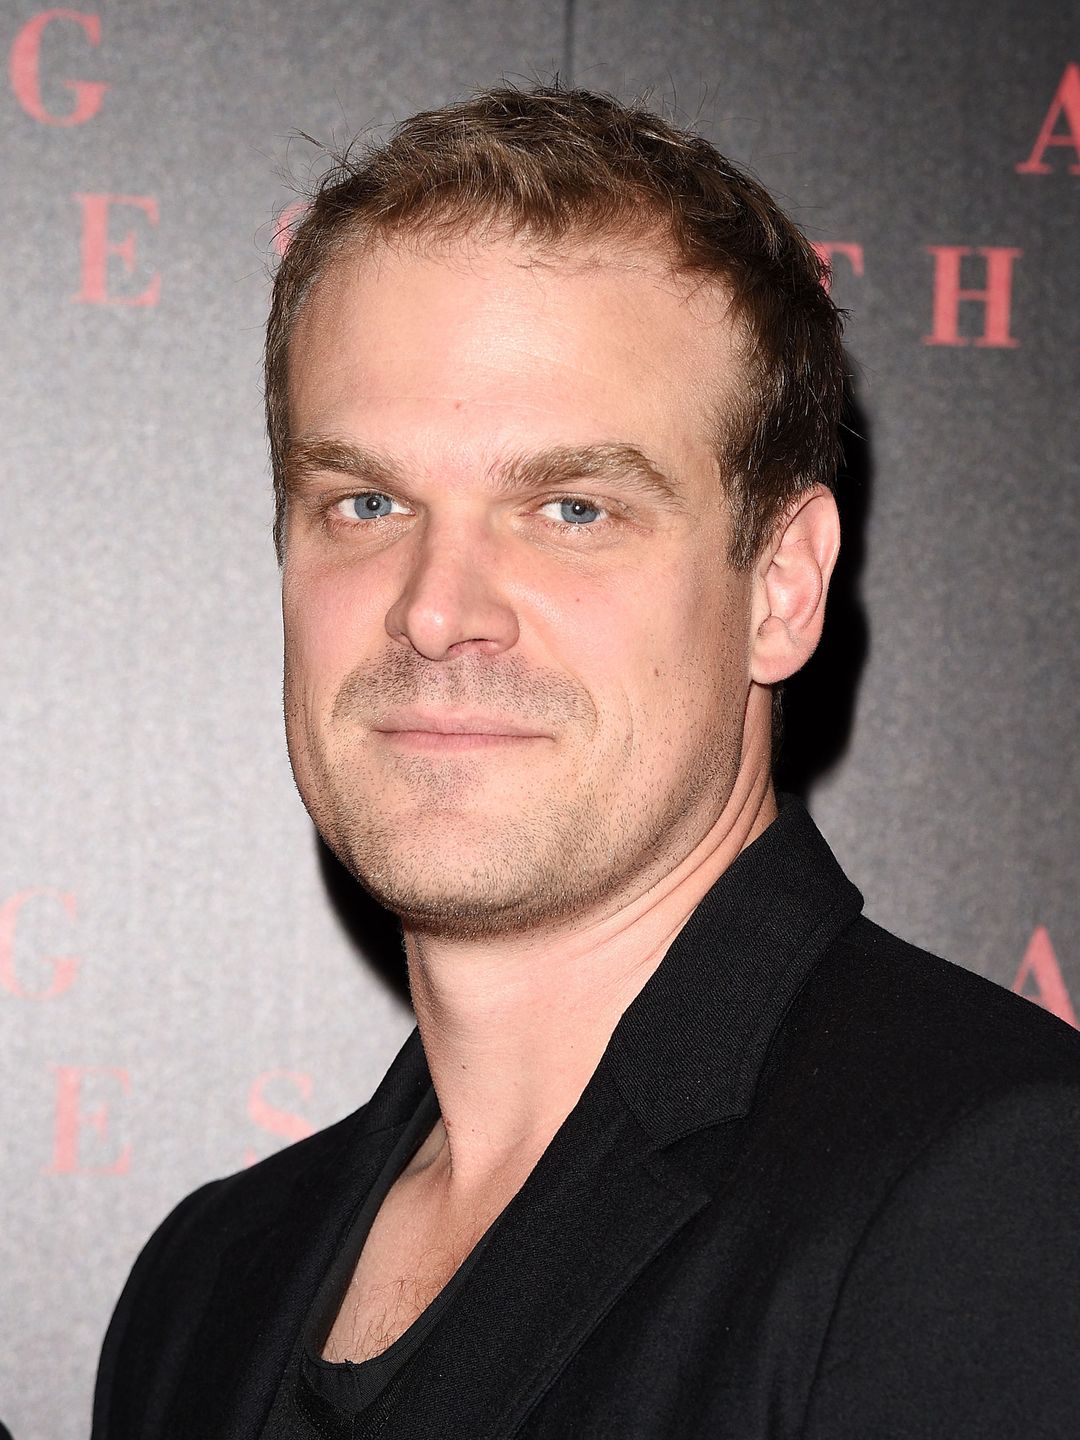 David Harbour interesting facts